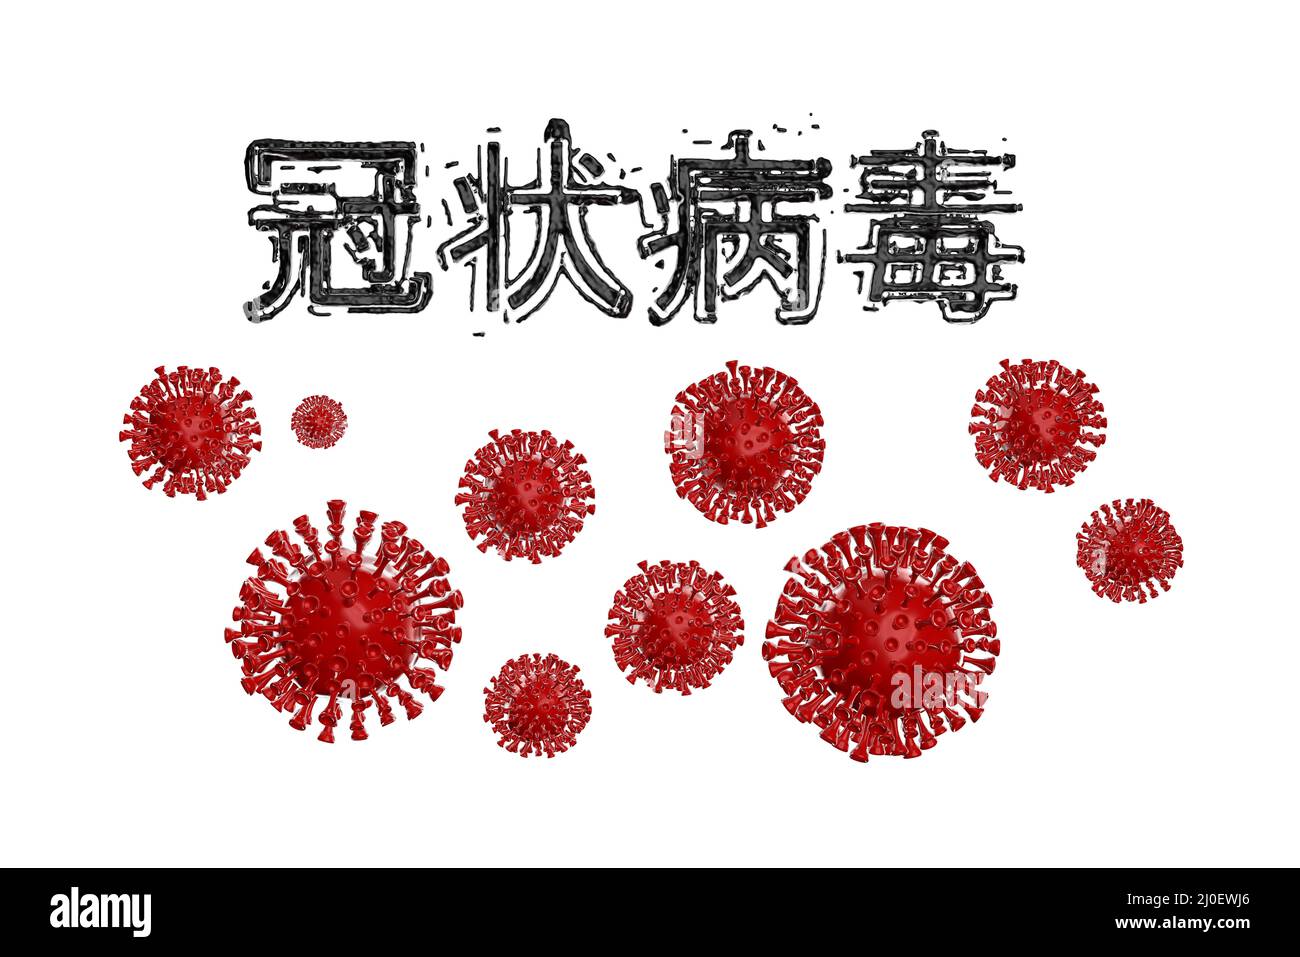 Coronavirus Wuhan, China COVID-19 inscription made by black Bblood with red corona cells below. Epidemic condition 3d illustrati Stock Photo